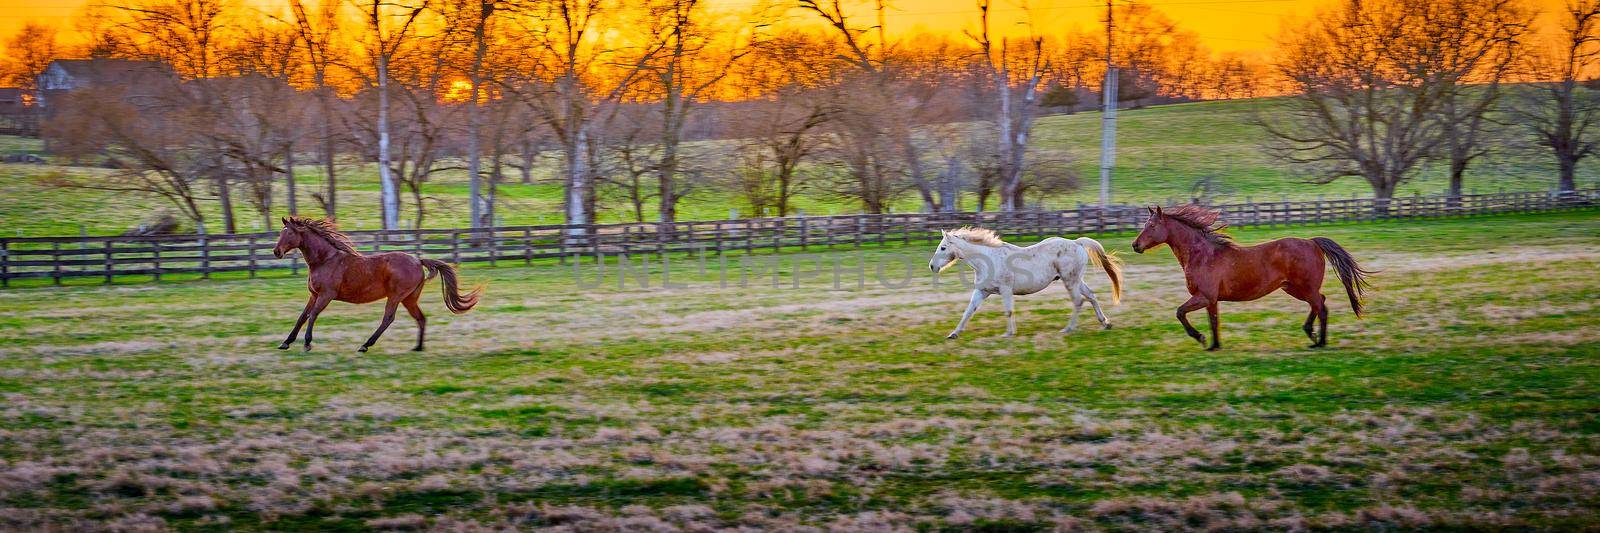 Three horses running in a field at sunset.